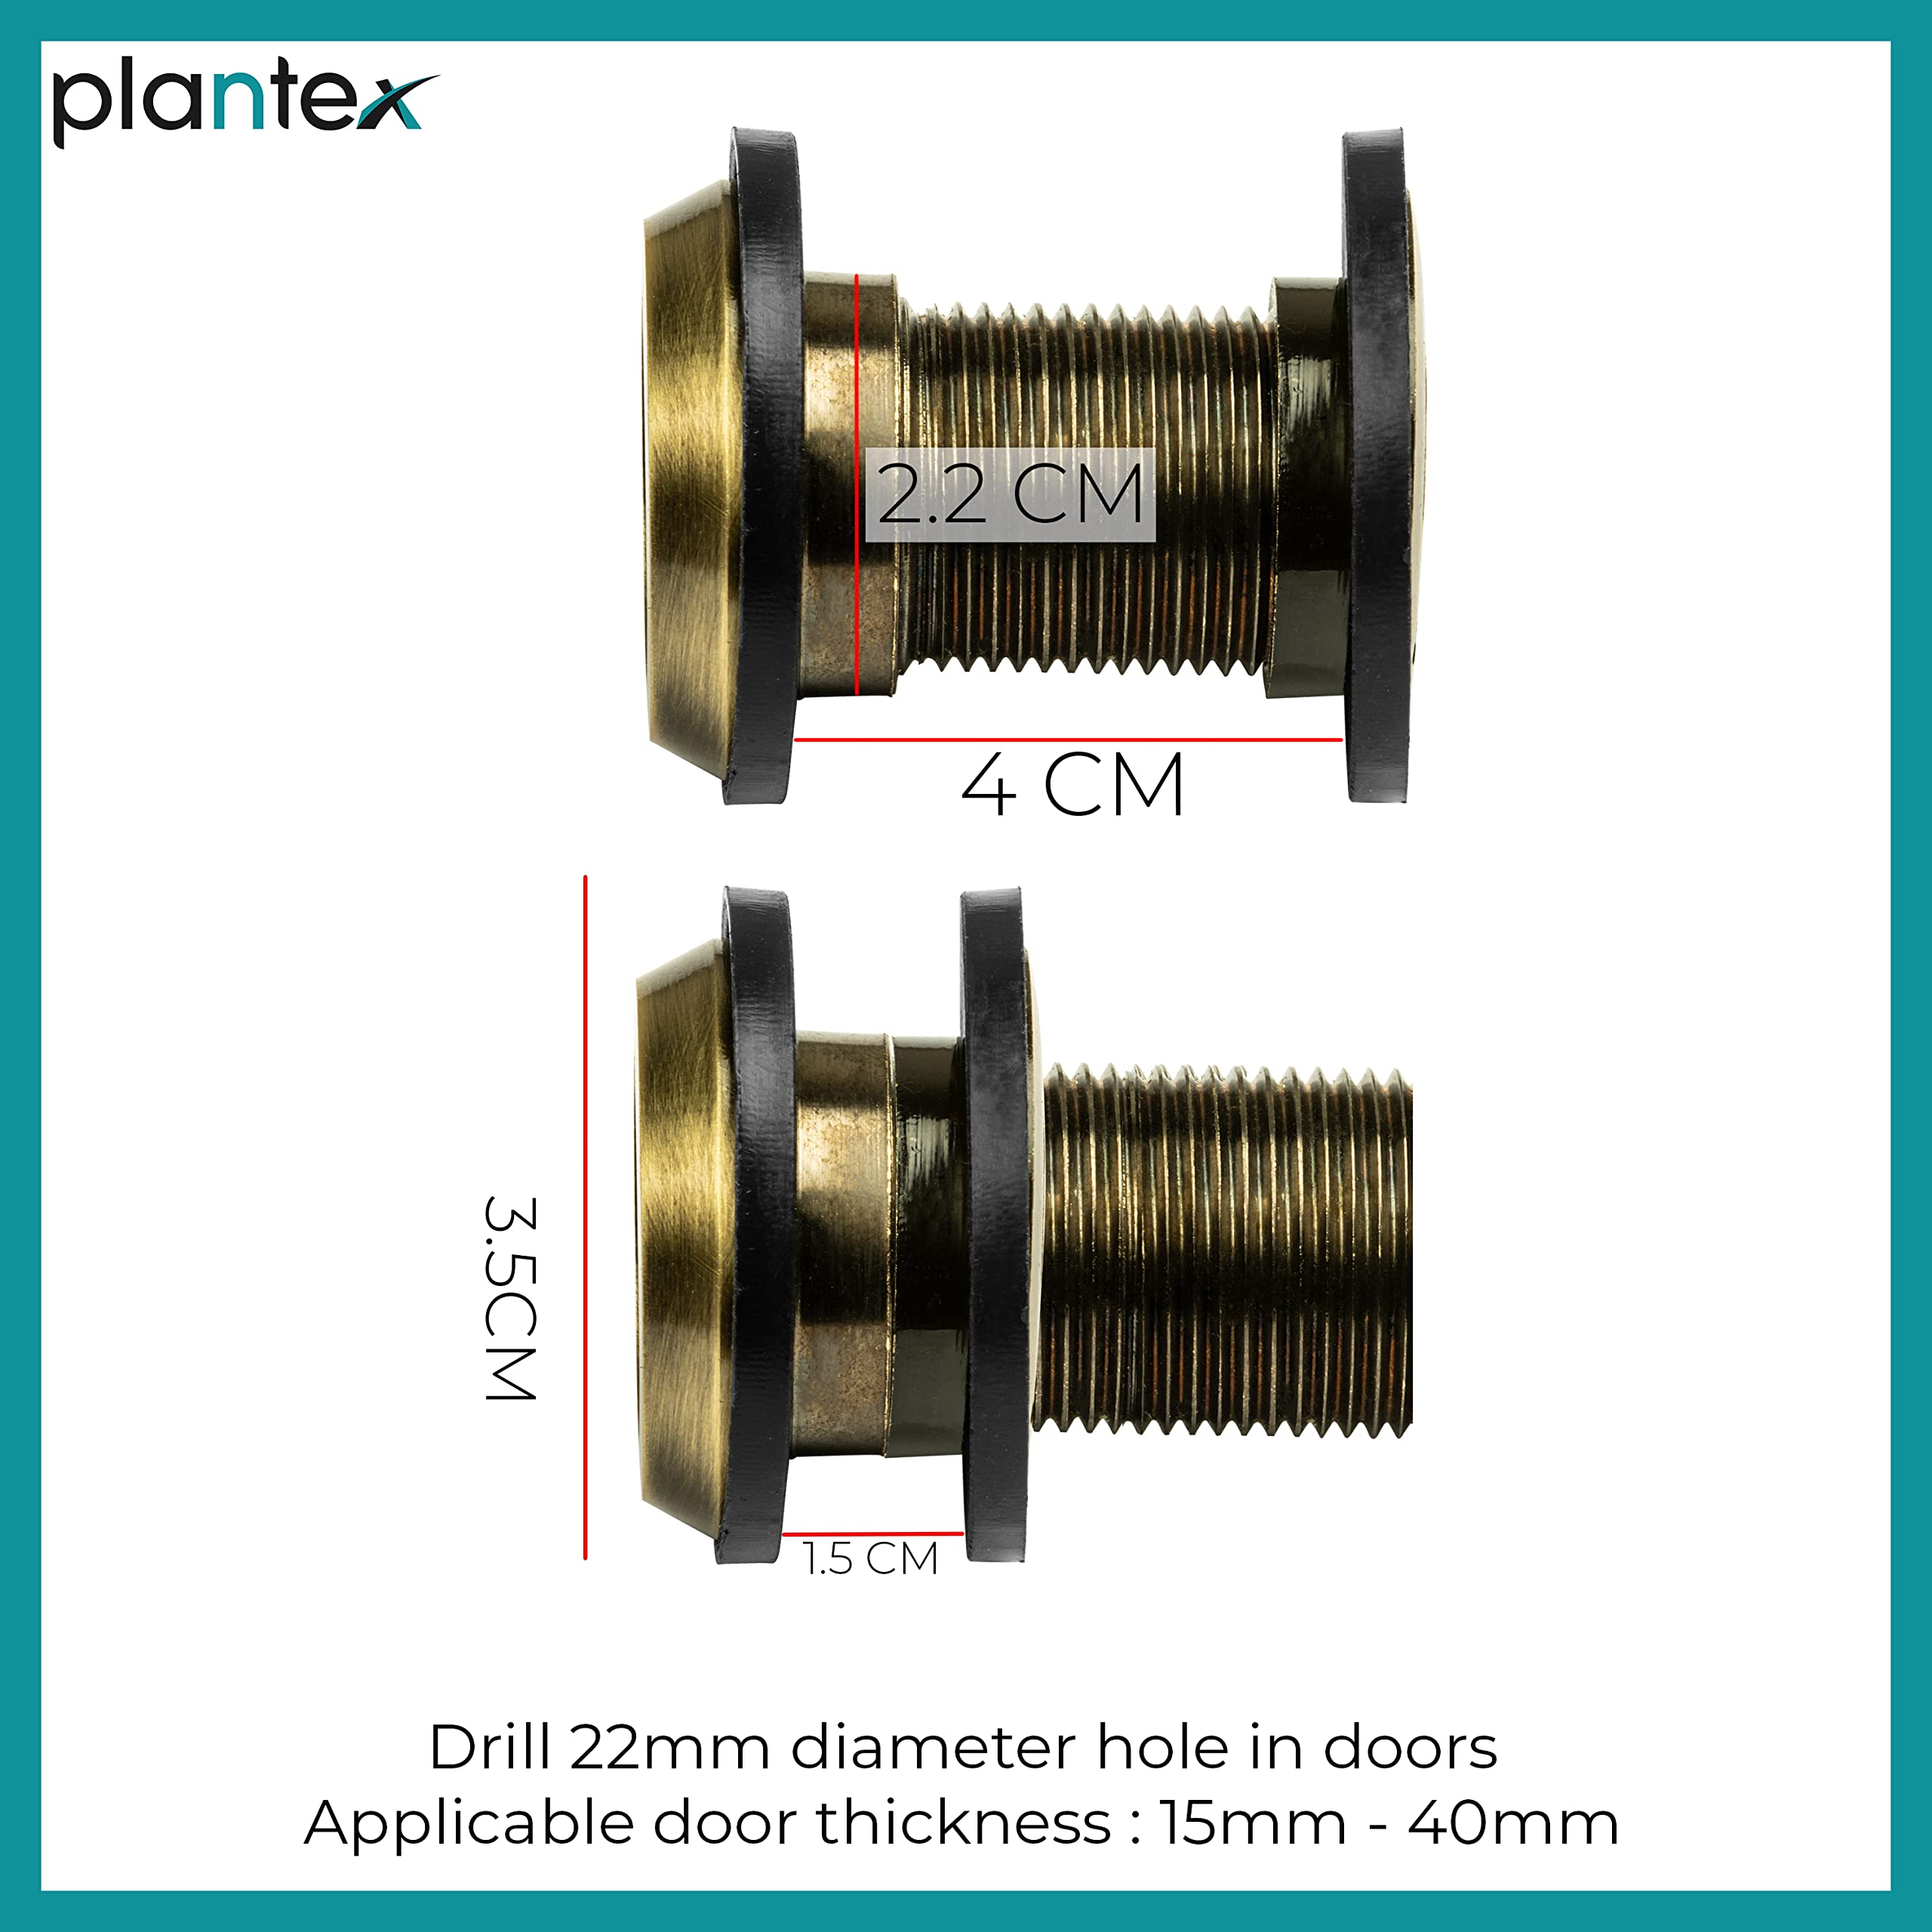 Plantex Round 200 Degree Door Eye Viewer Crystal Ultra Clear Lens for Safe Secure Home/Office/Hotel - Pack of 20 (Brass Antique)